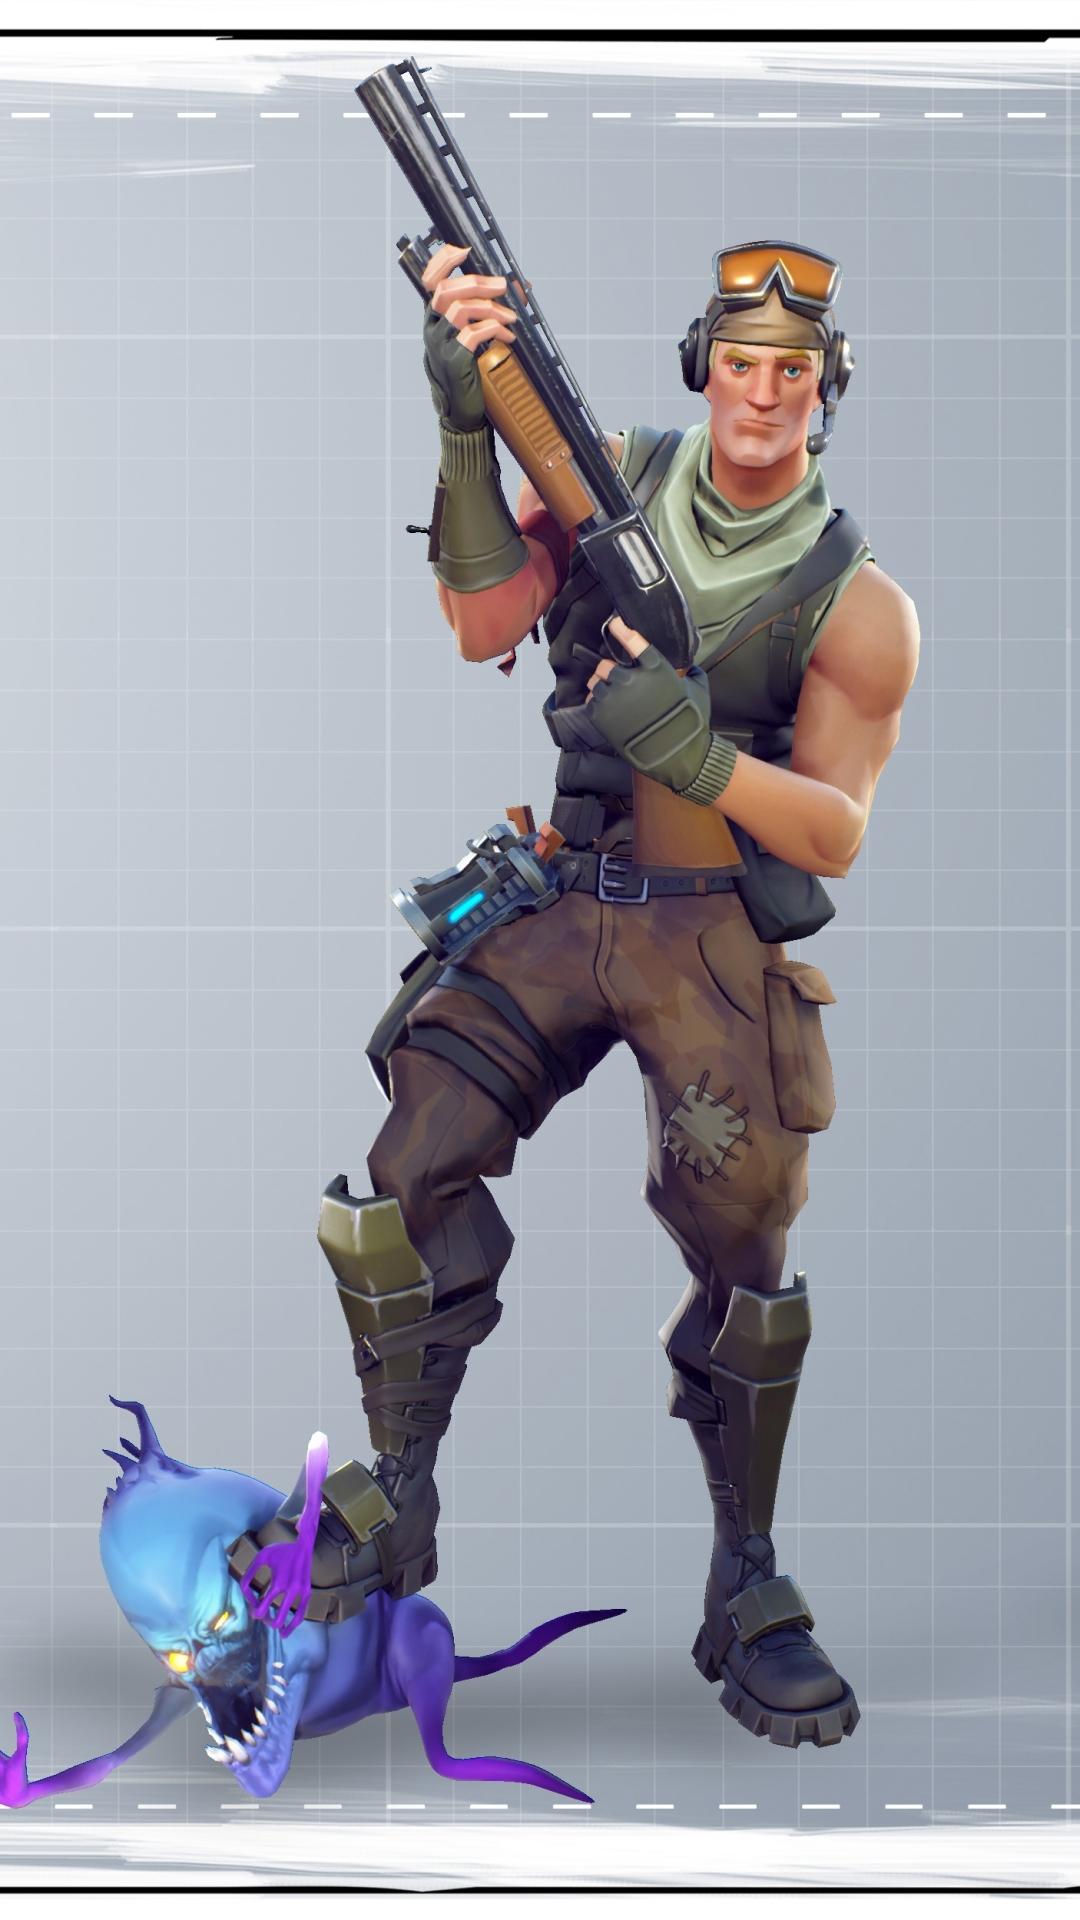 Fortnite Soldier 4k wallpaper for iPhone and Android